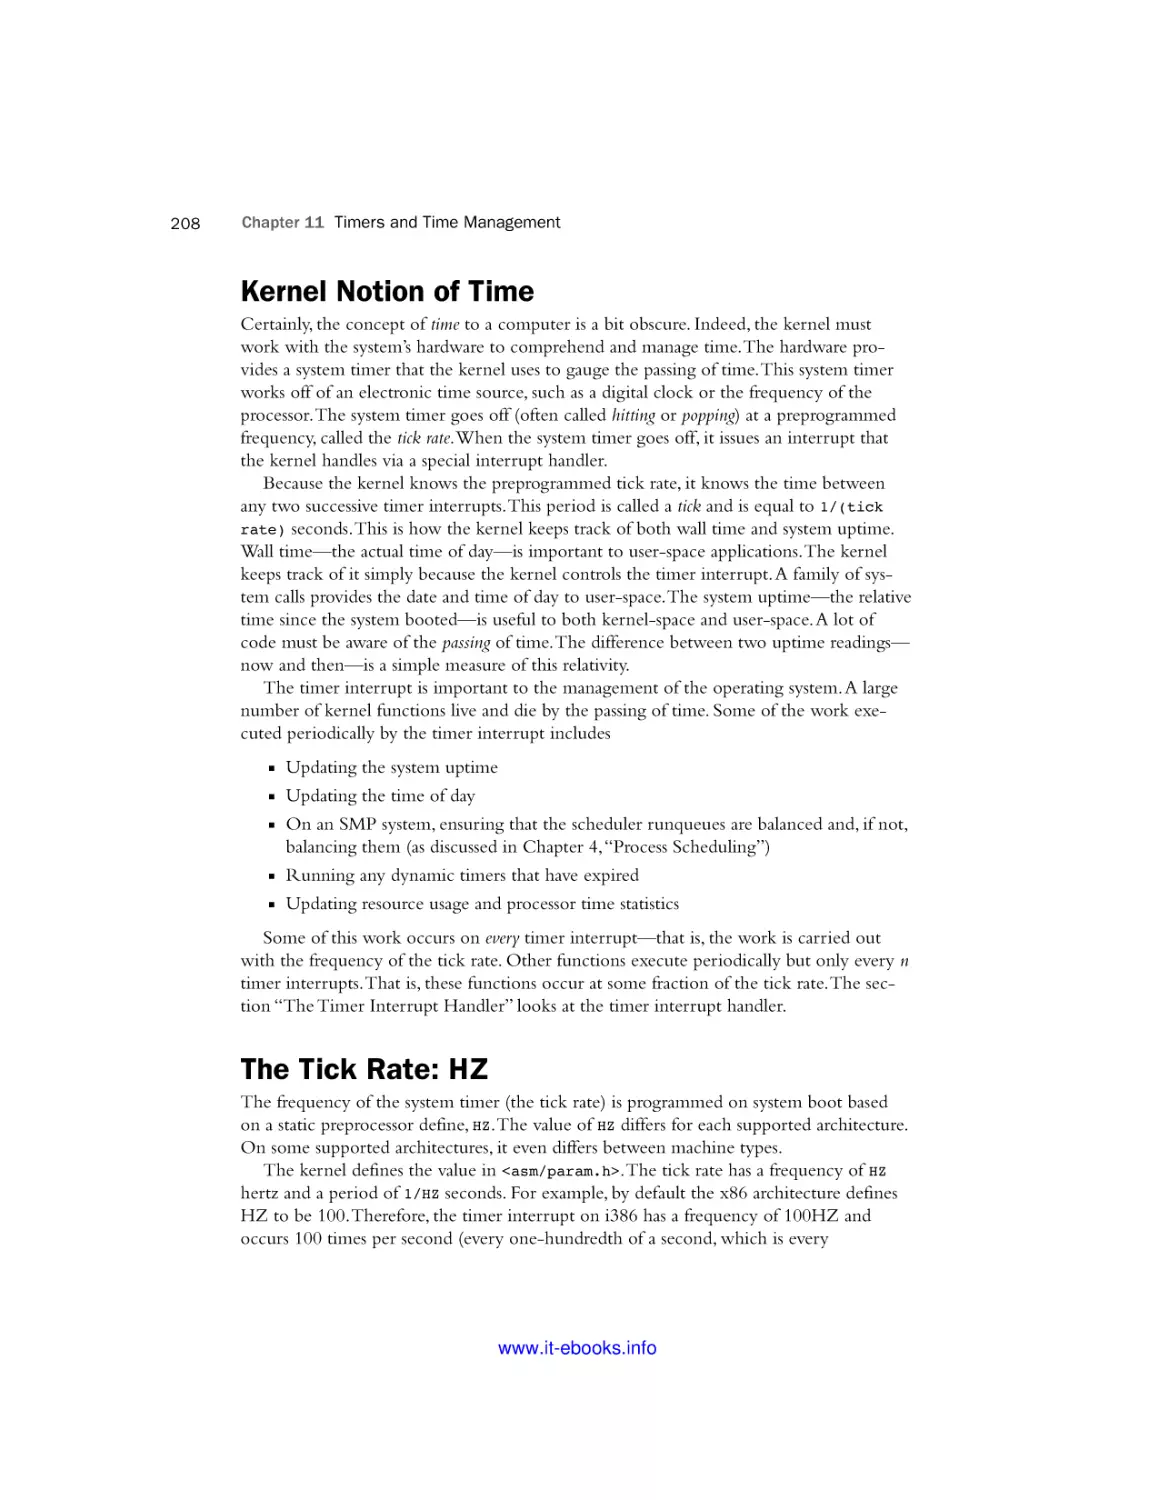 Kernel Notion of Time
The Tick Rate